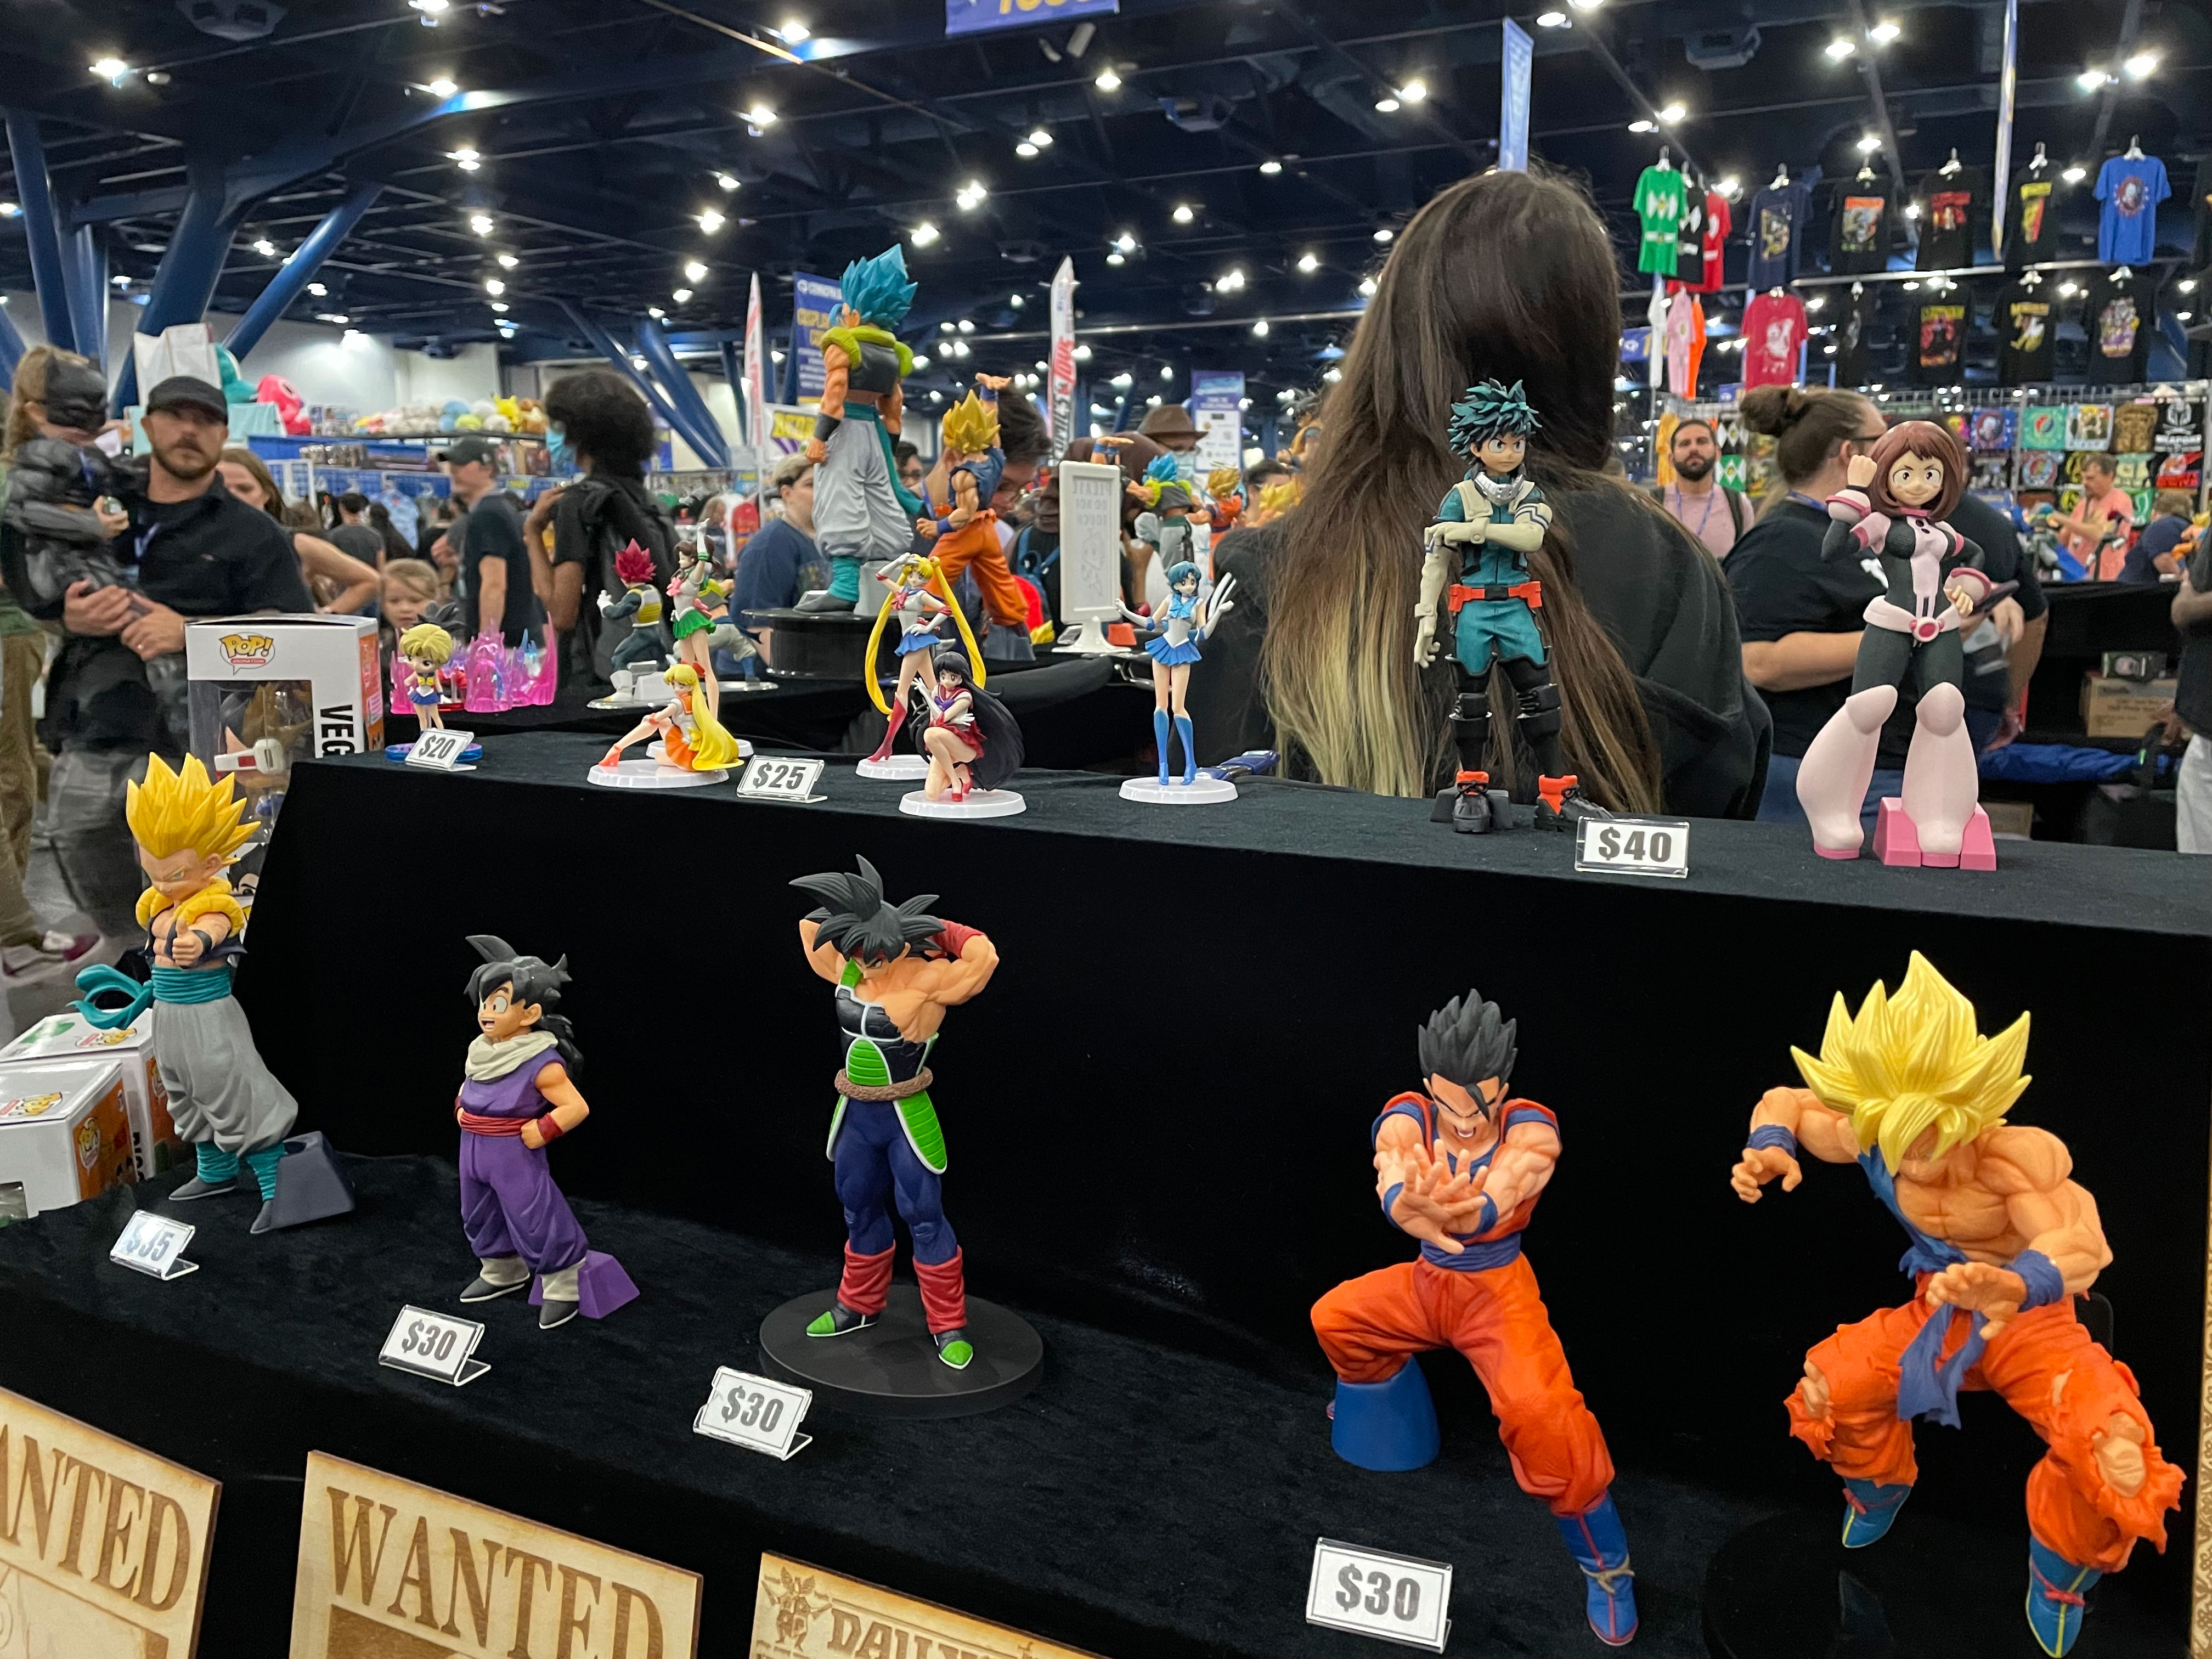 PHOTO: Image depicts multiple Dragon Ball Z action figures at the convention Comic Palooza. Multiple people can be seen in the background. Photo by The Signal Managing Editor of Content and Operations Troylon Griffin II.